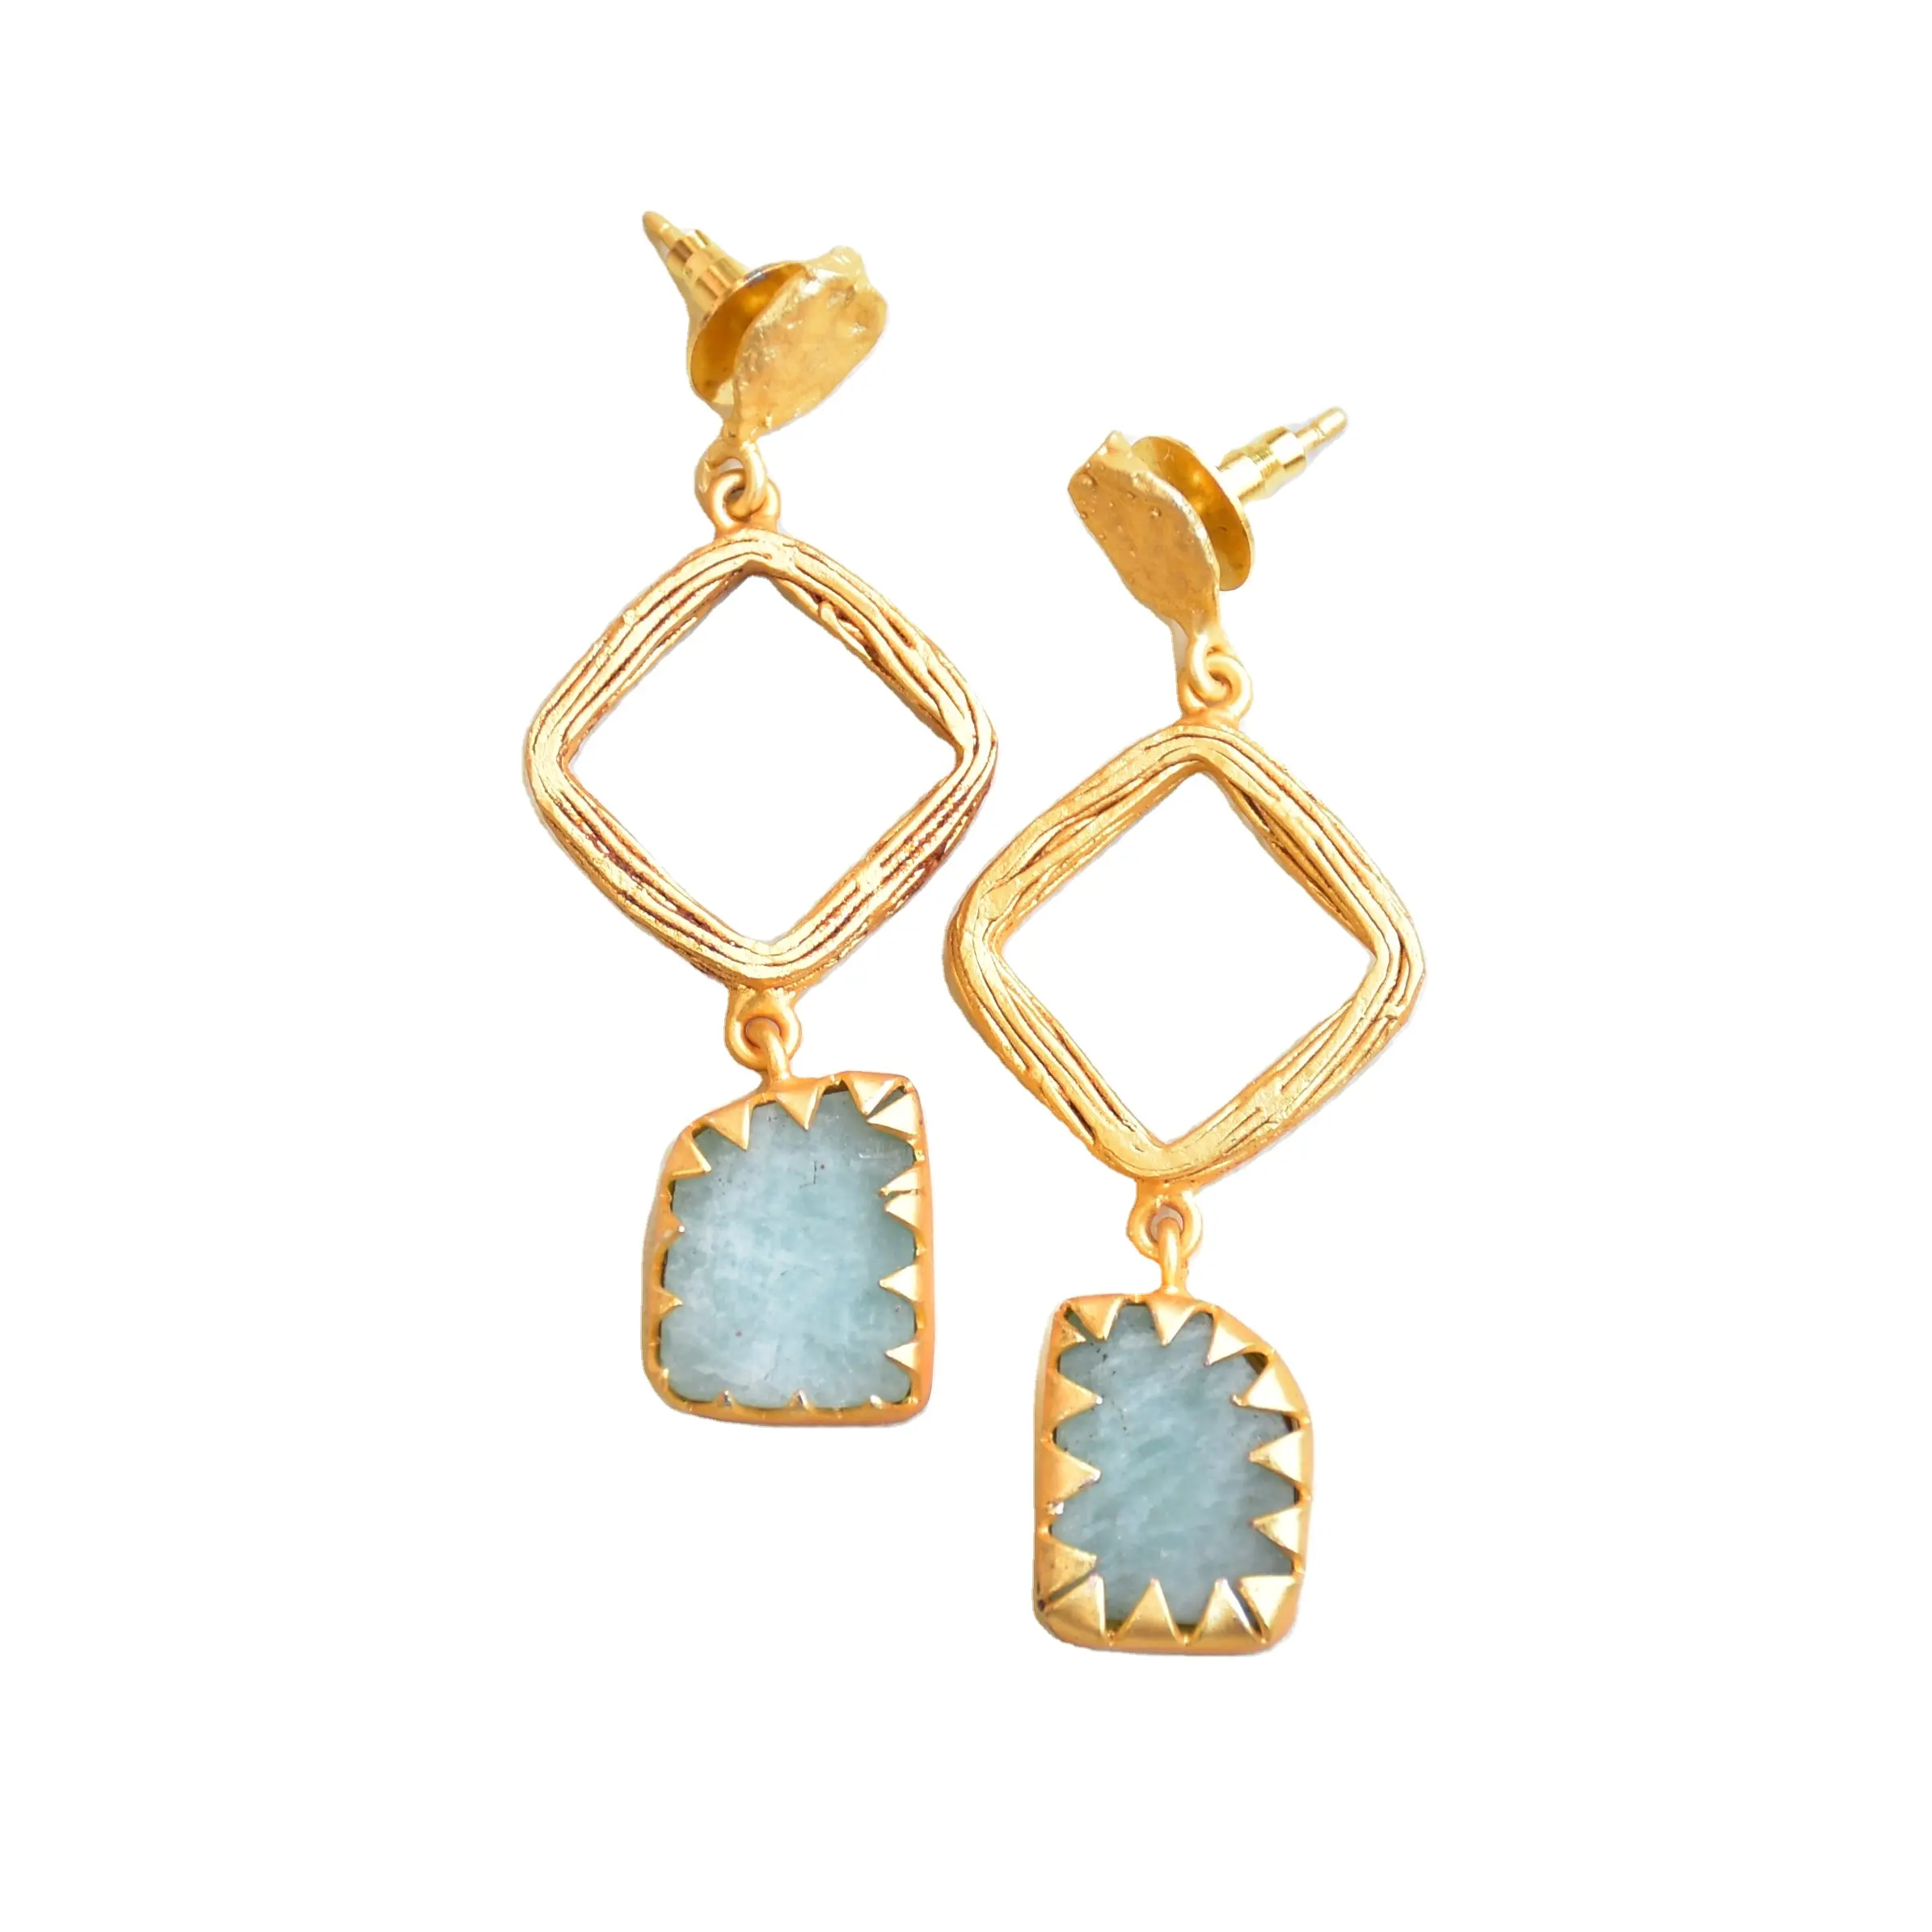 Amazonite handmade earrings Long drop geometric statement earring Fashion jewelry supplier and wholesaler gold plated jewellery